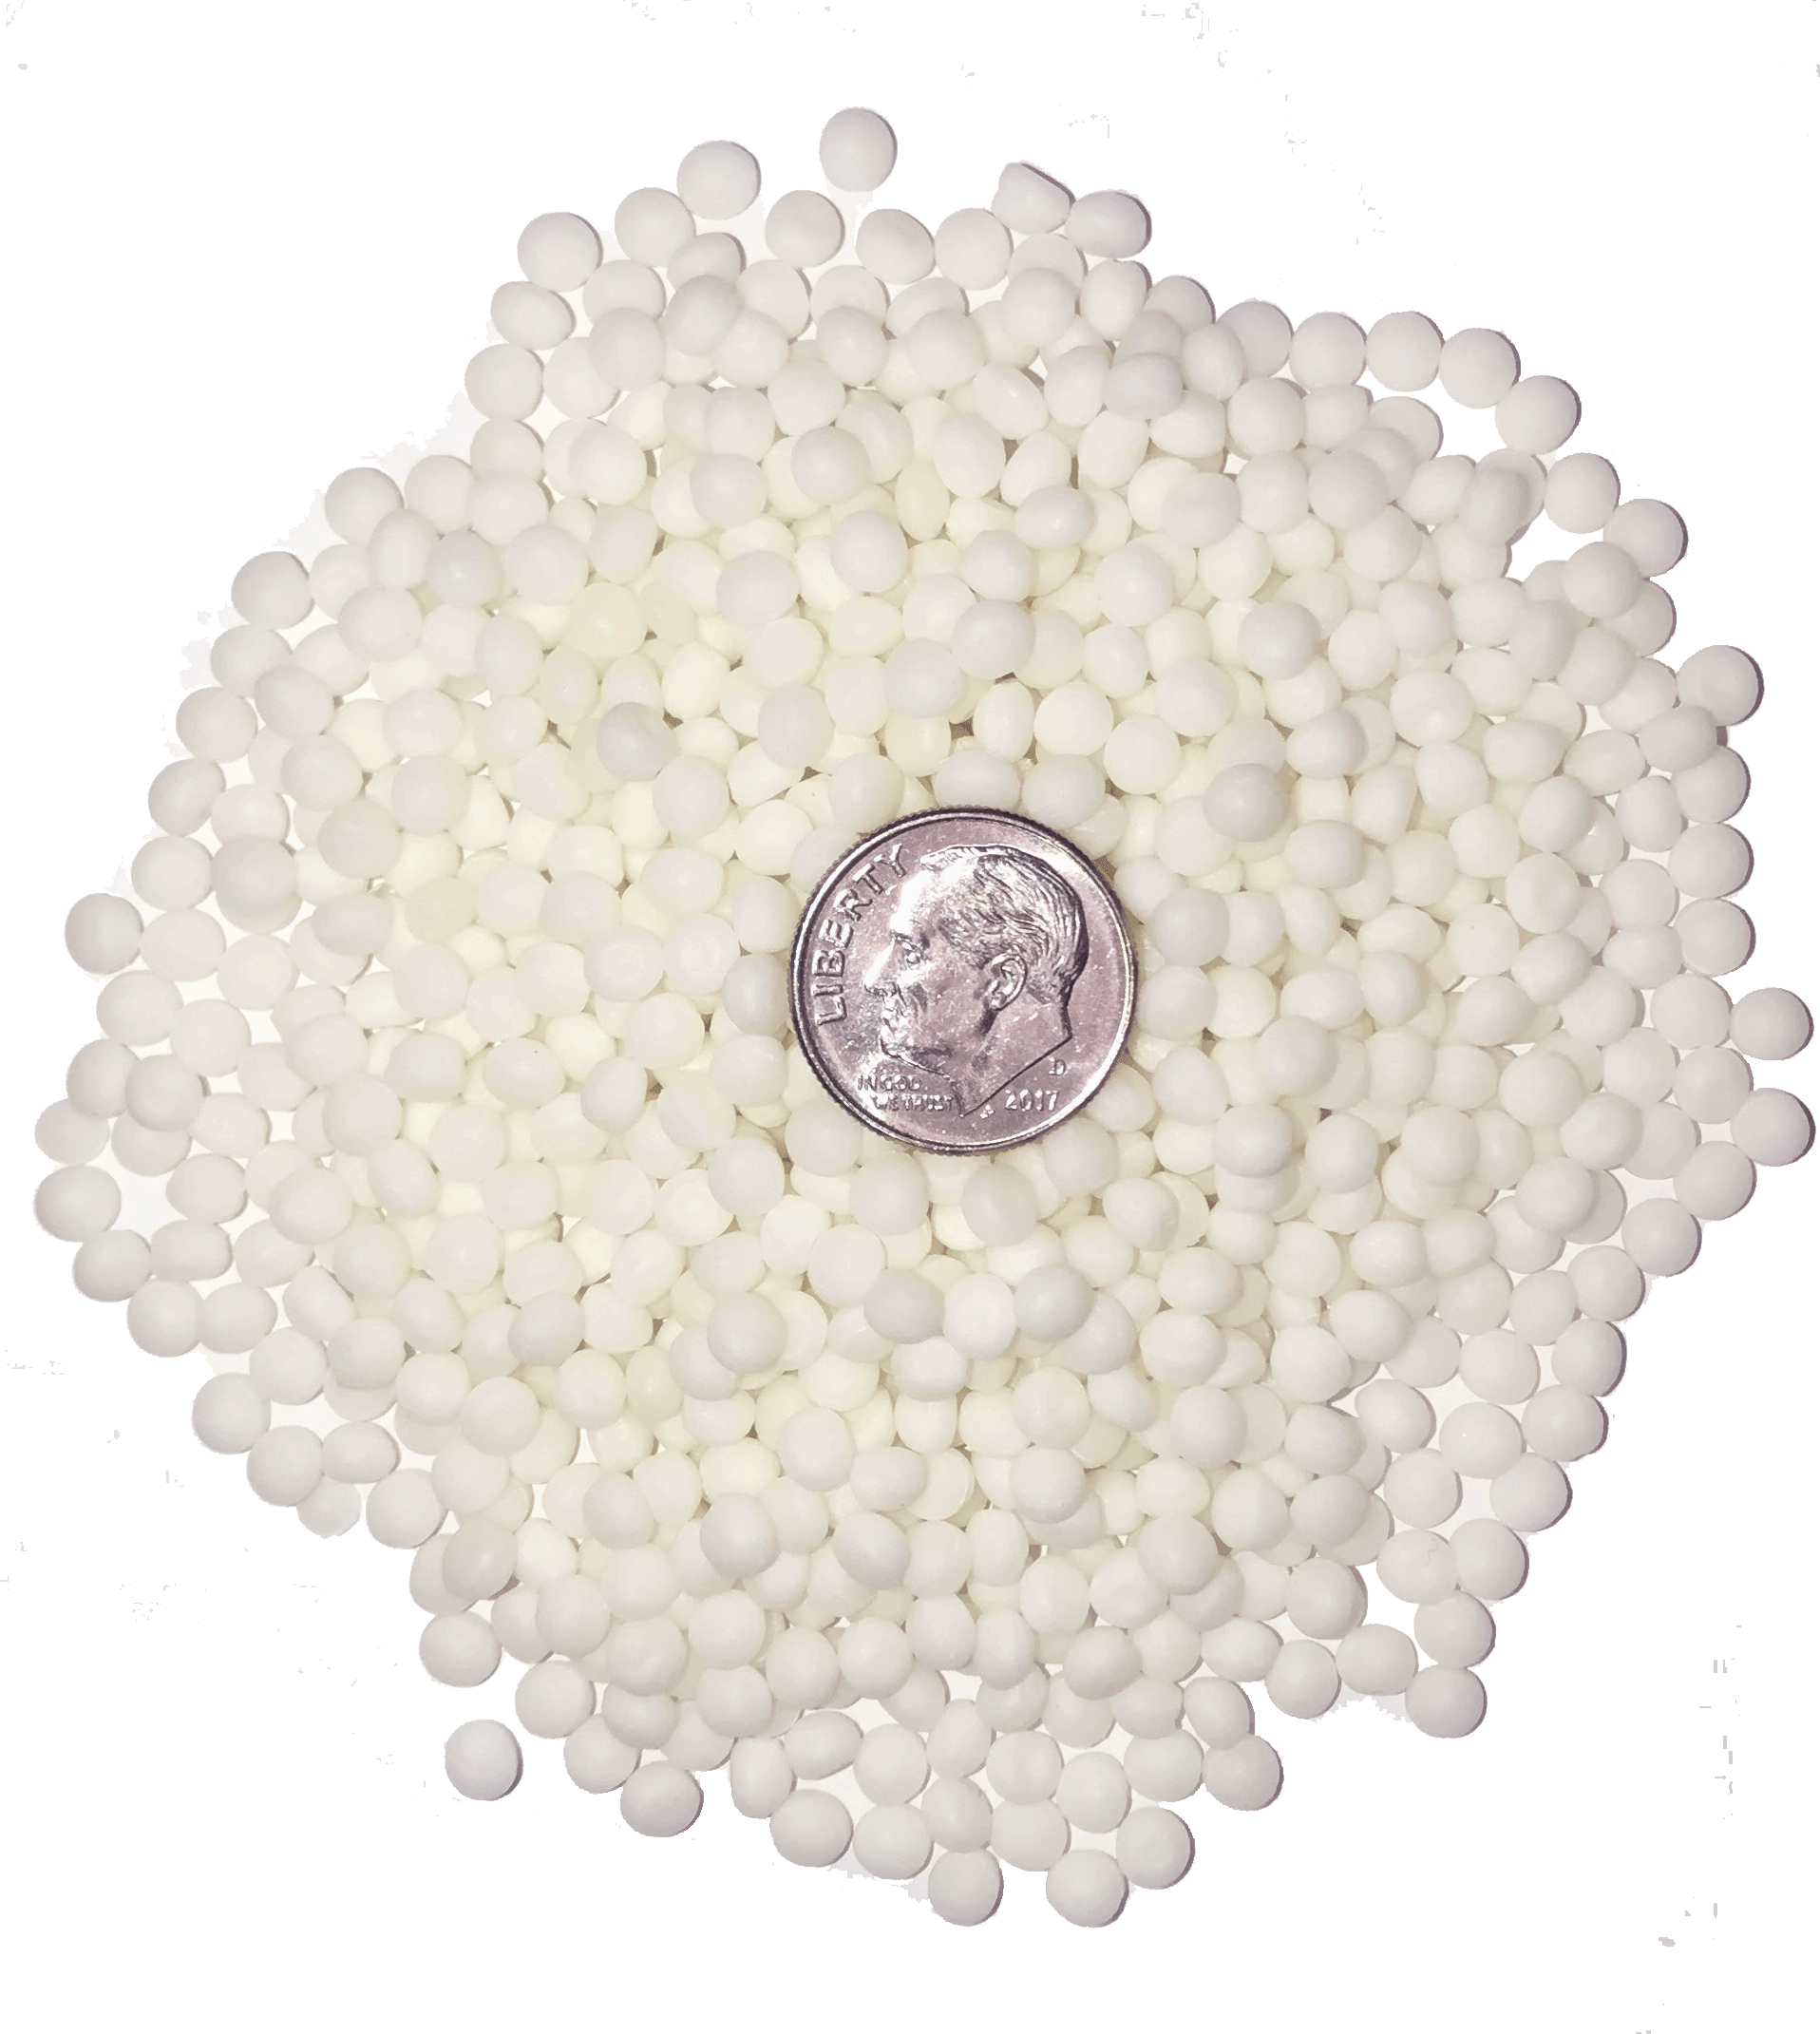 Details about   6 lb Beige Plastic Poly Pellets Washable Dryable Free Shipping American Made 